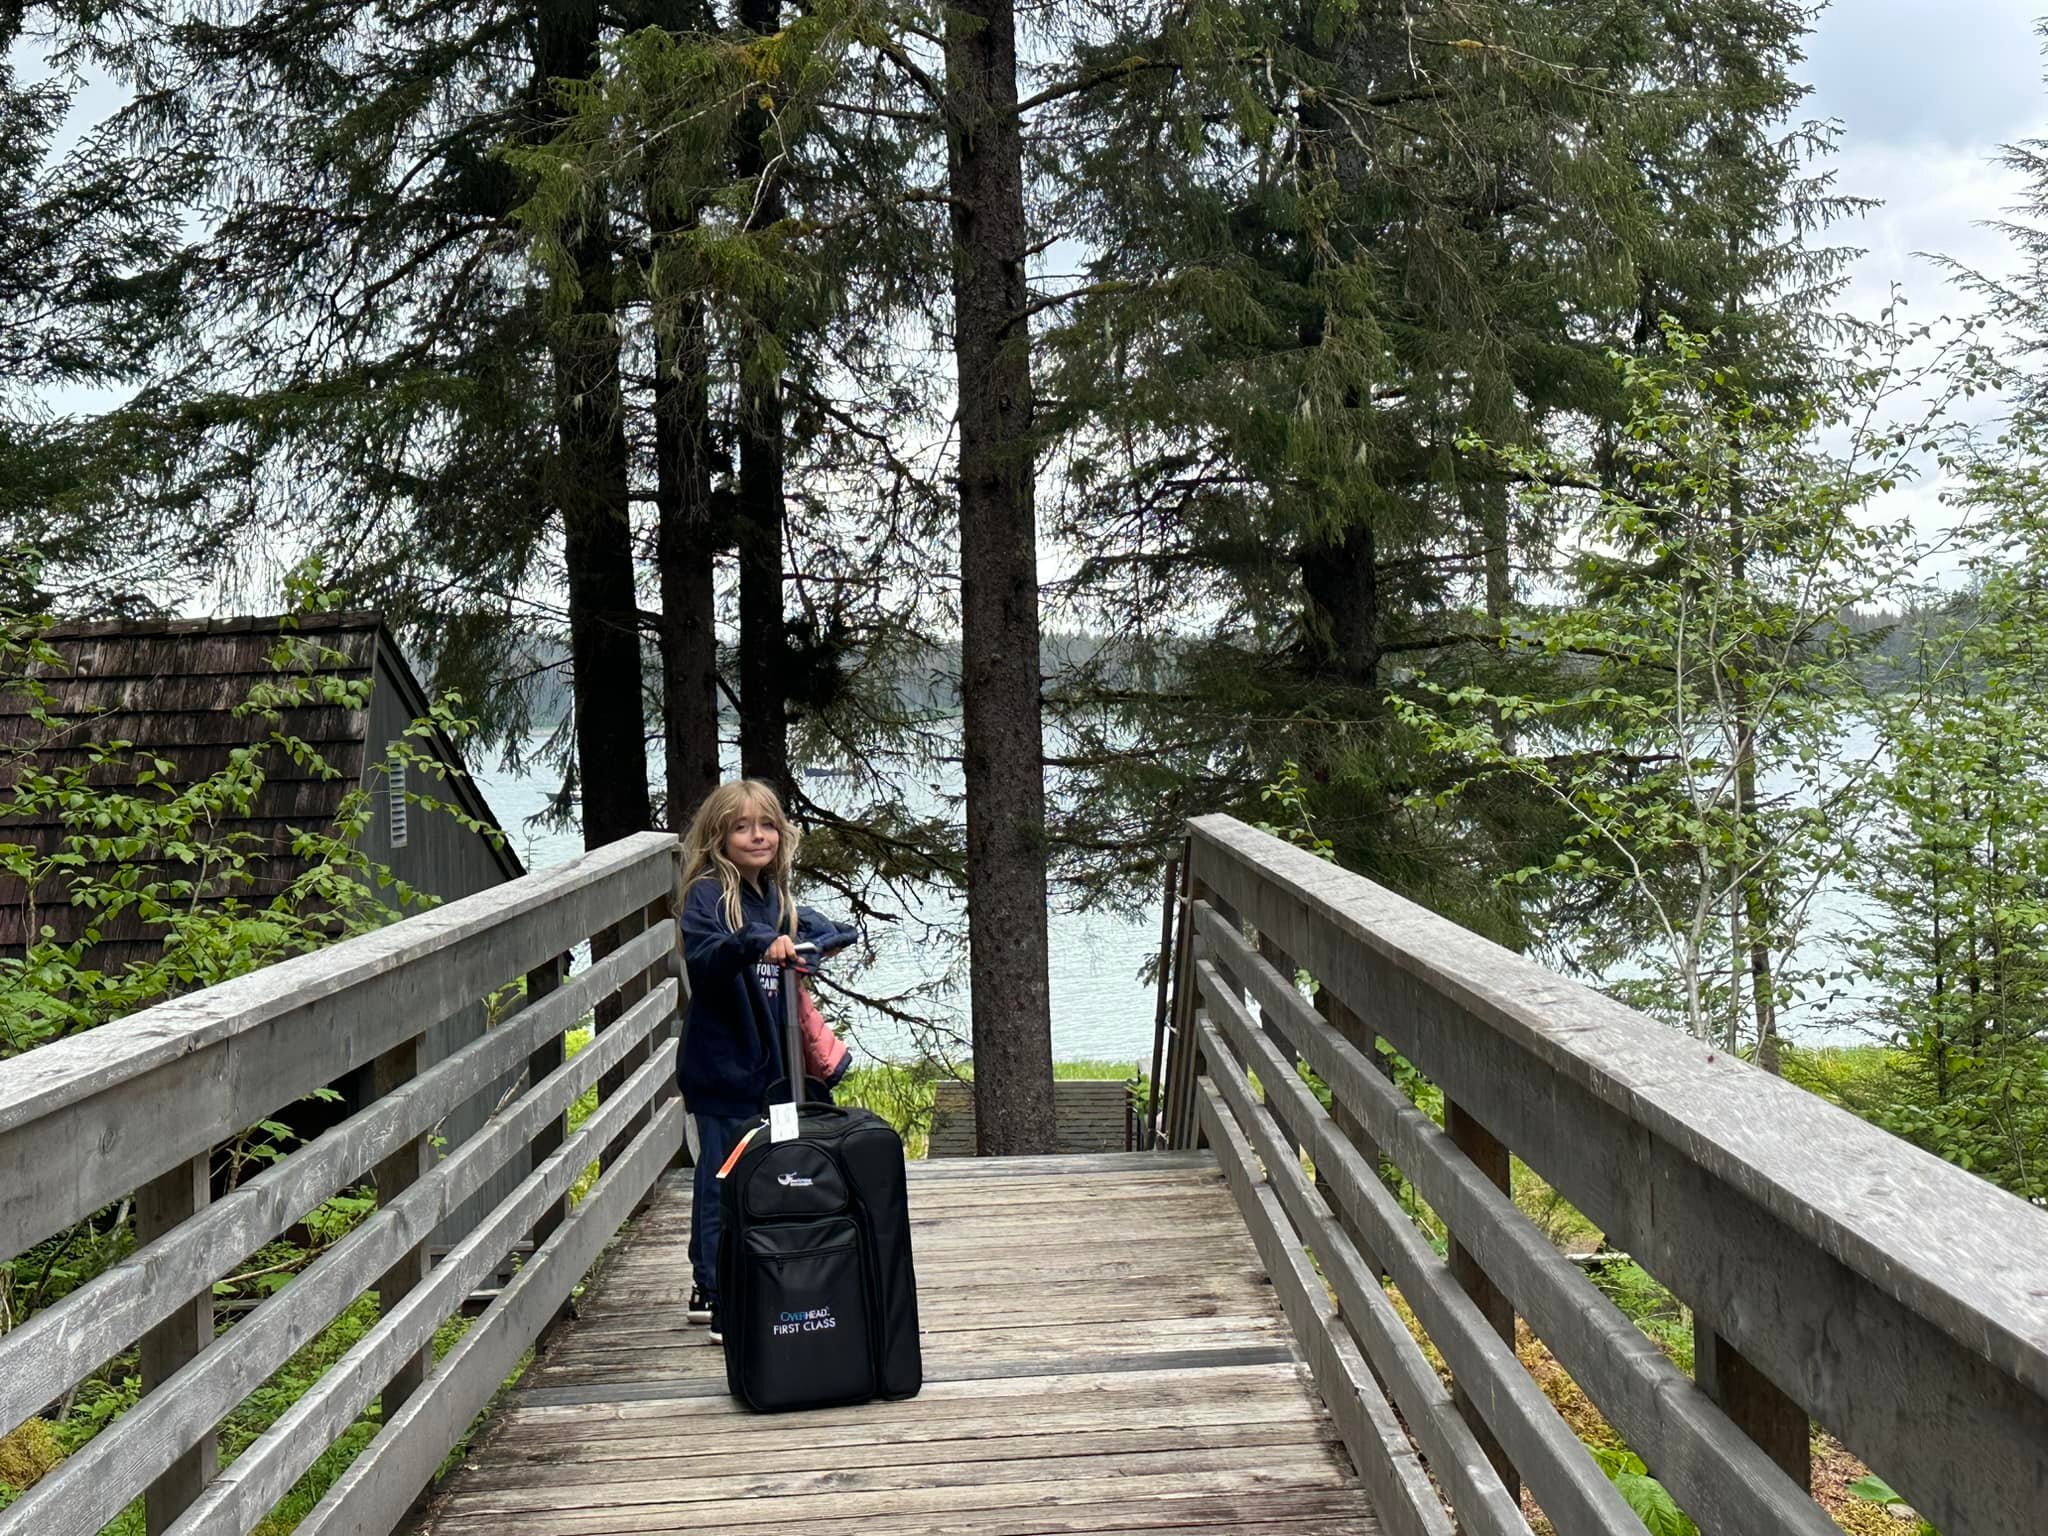 No cell or internet for a few days. We are staying in a National Park and there is only weak Wi-Fi in the Ranger Station. Here is Fiona taking her Junior ranger pledge 🙂 Going on the National Parks Boat to Glacier Bay tomorrow 🙂